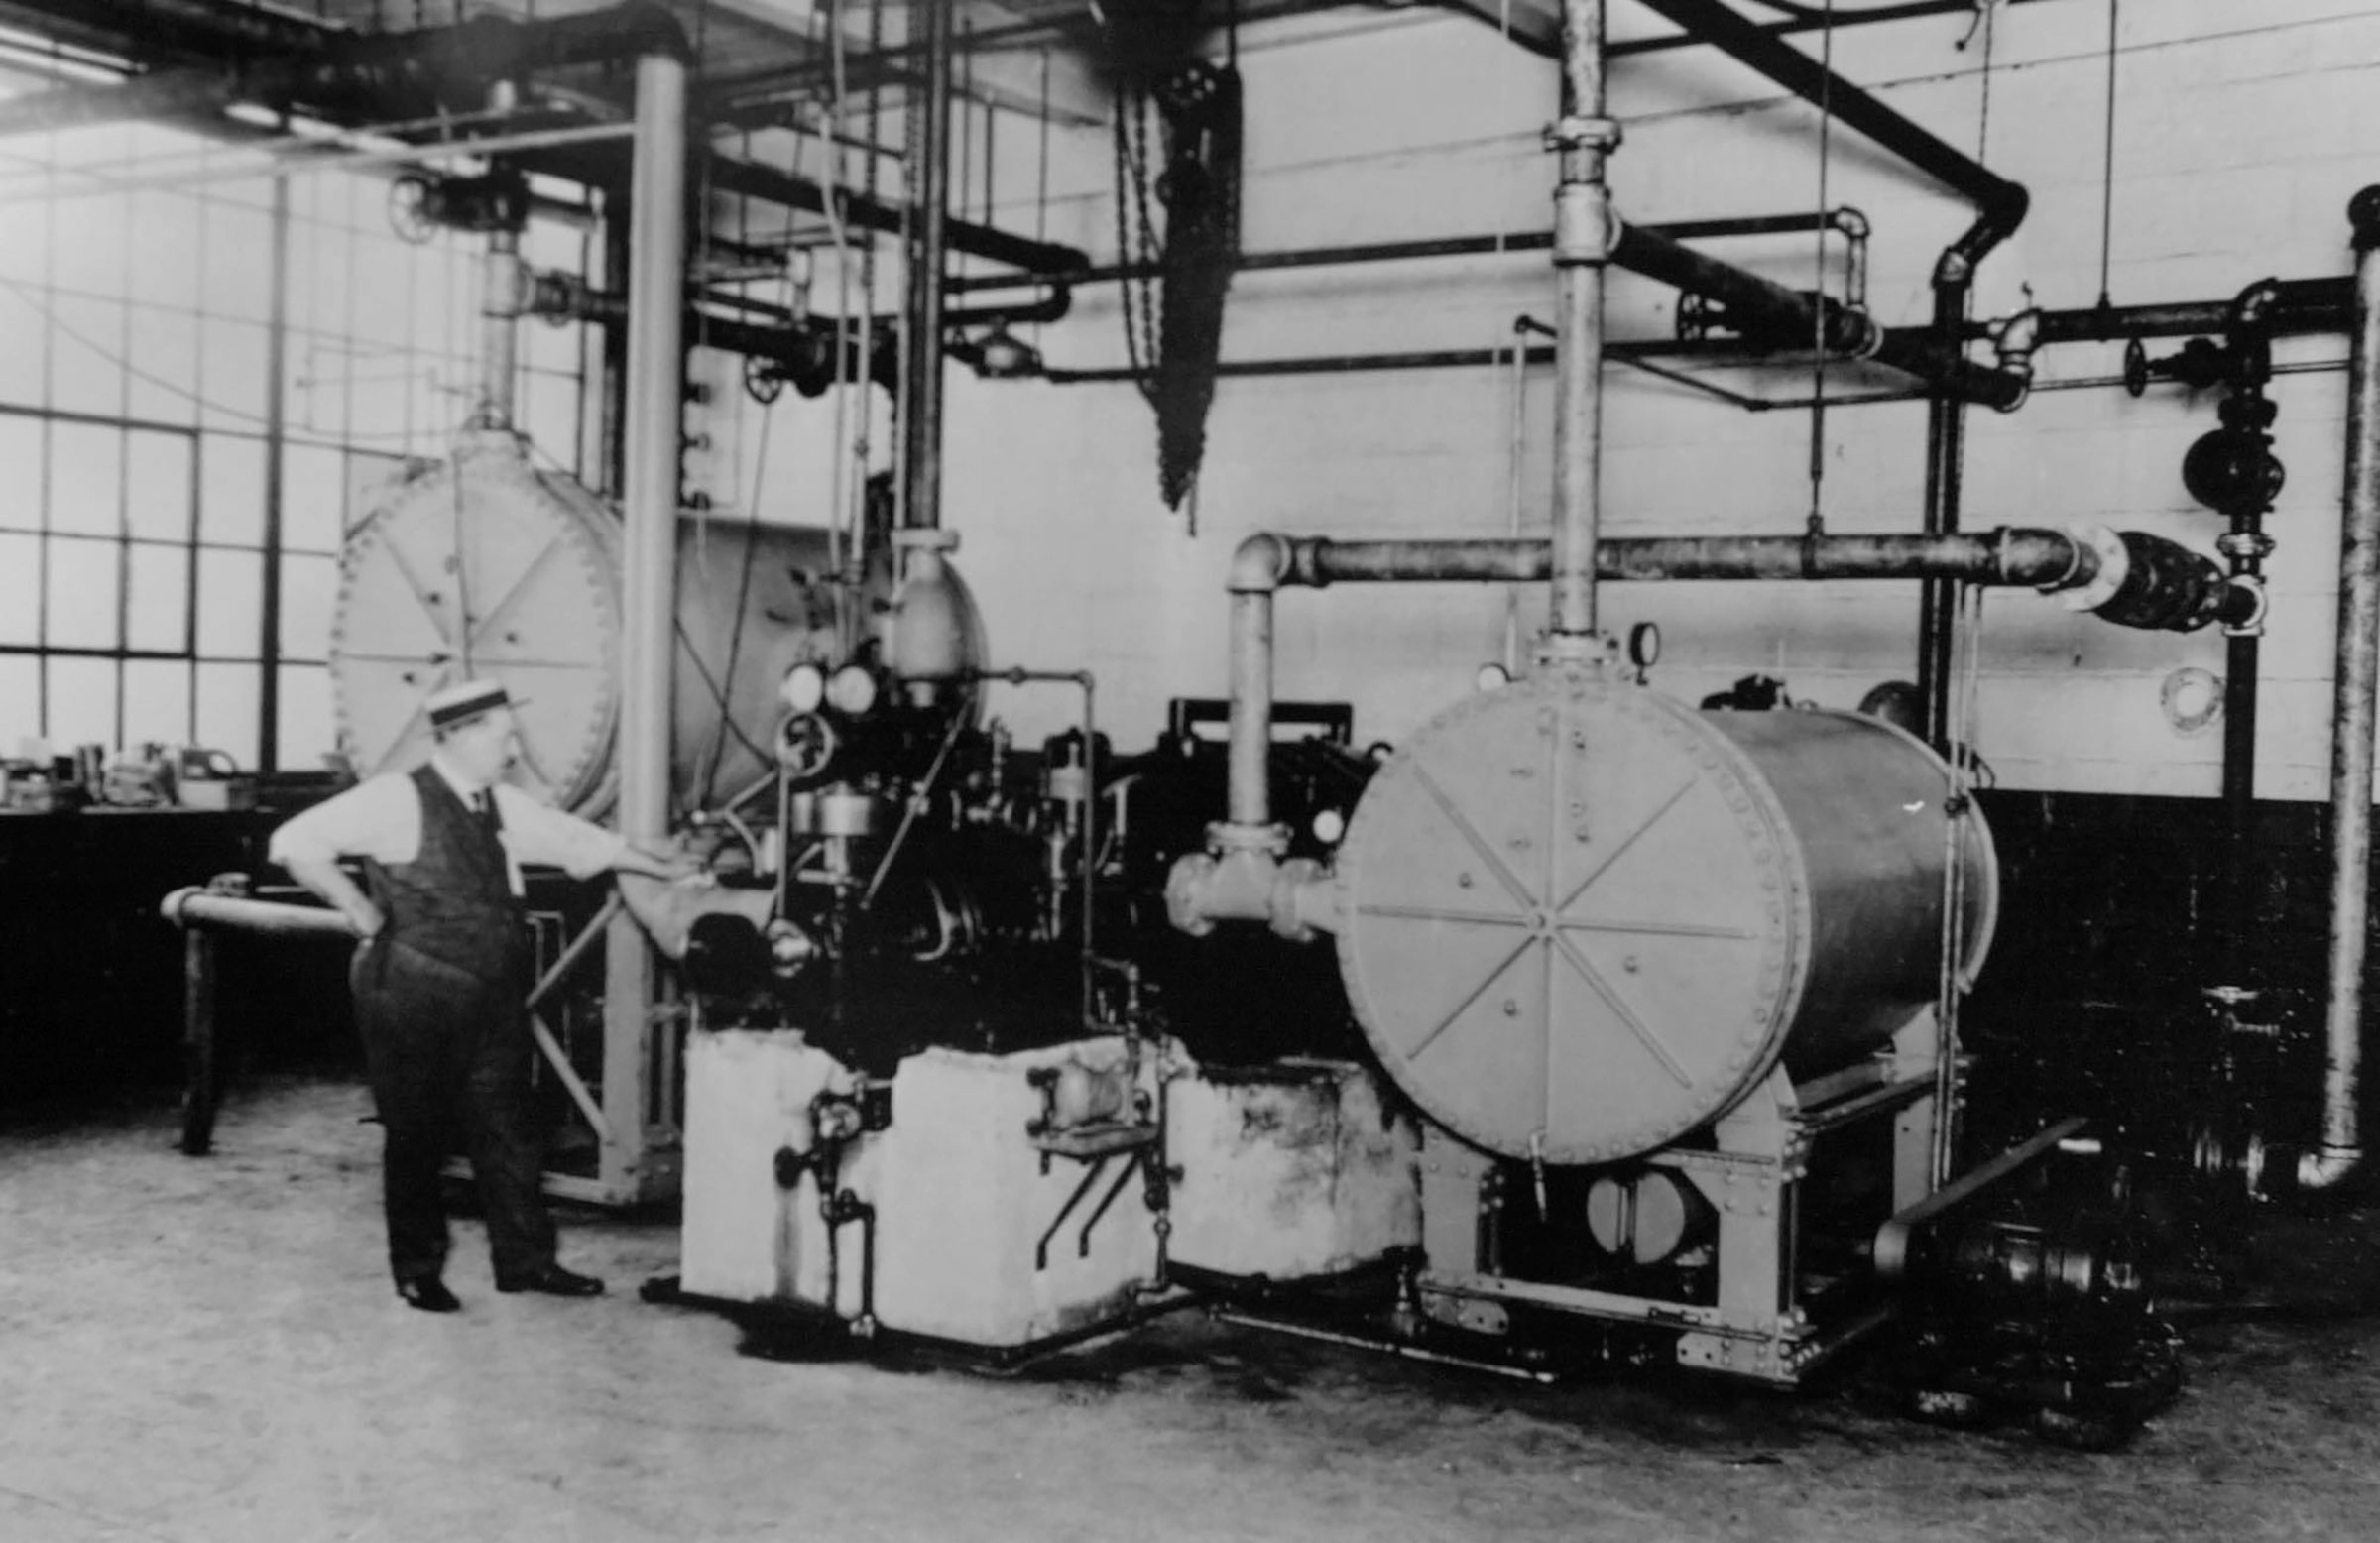 The first centrifugal refrigeration machine invented by Willis H. Carrier, the father of air conditioning, is pictured in Syracuse, New York in 1922.